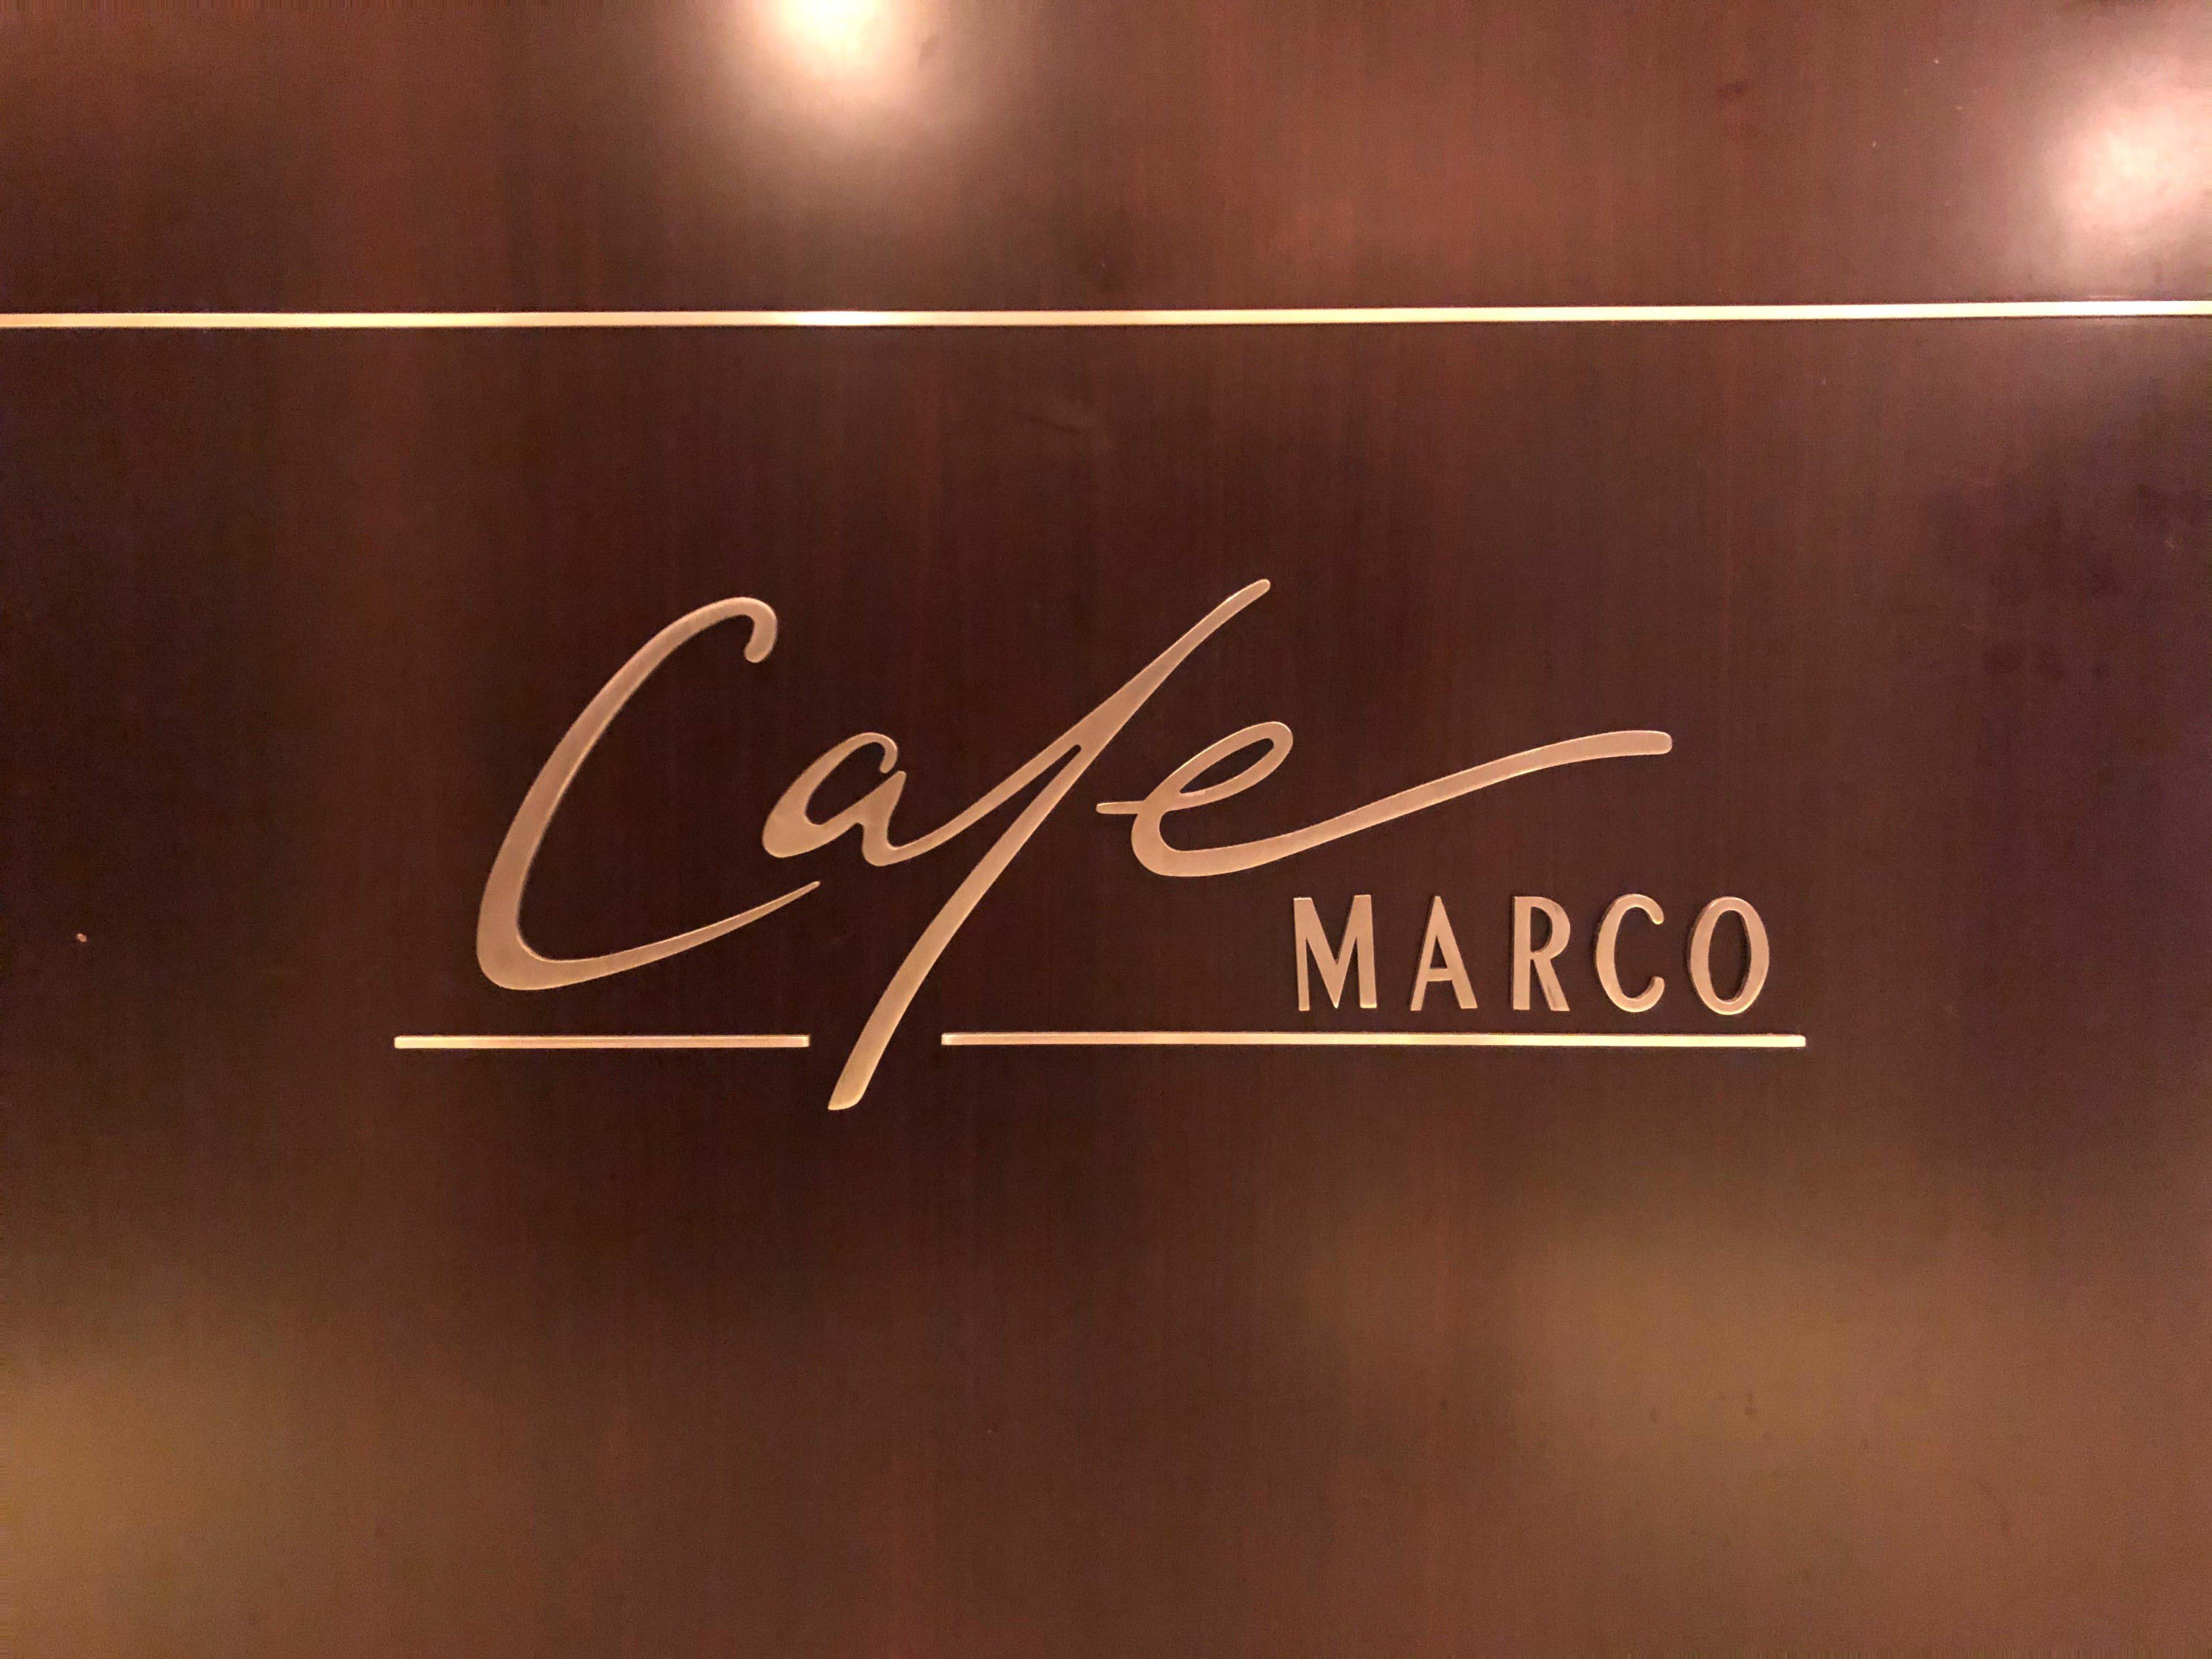 Café Marco 馬哥孛羅咖啡廳 – Marco Polo Hongkong Hotel Hotel Dining Western Buffet  credit card rewards and discounts – krip HK